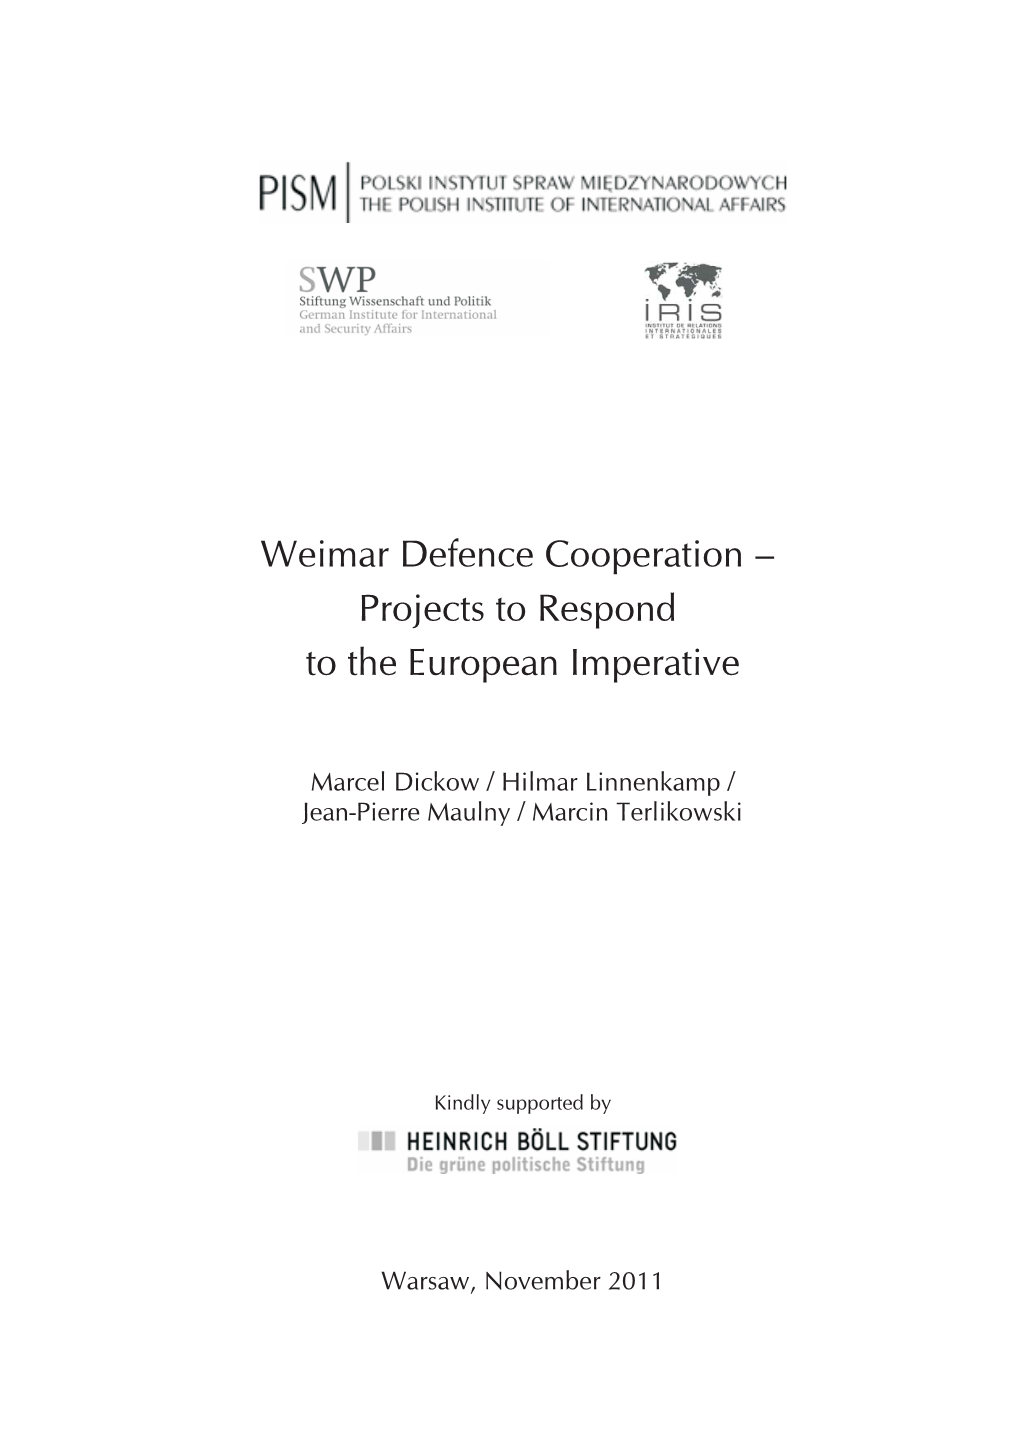 Weimar Defence Cooperation – Projects to Respond to the European Imperative